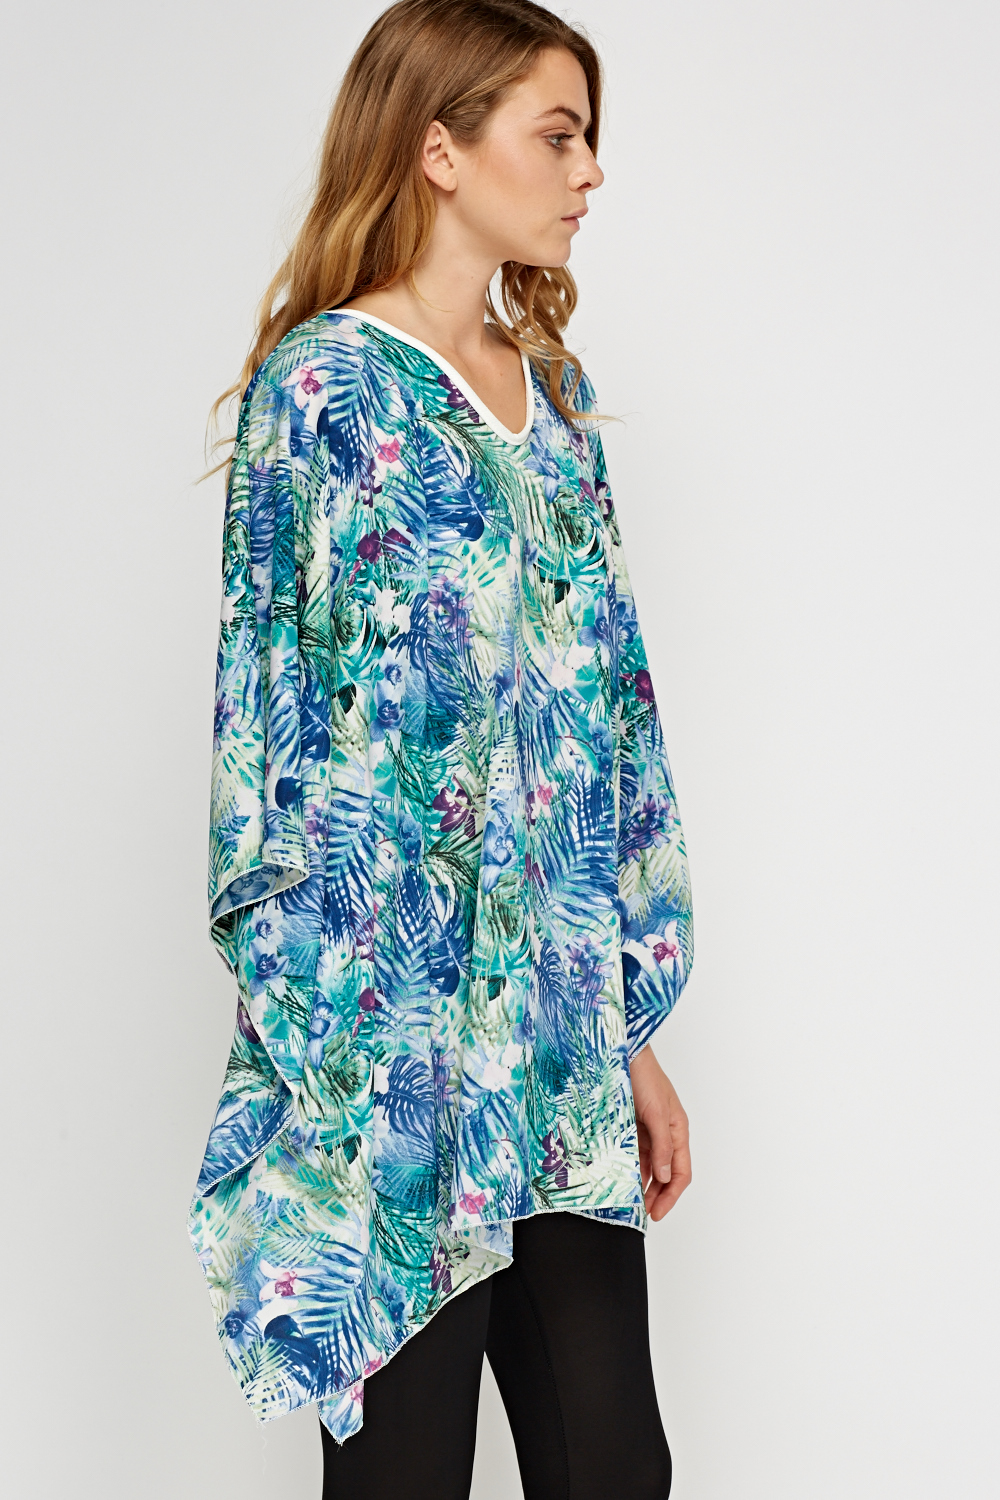 Printed Batwing Cover Up - Just $6